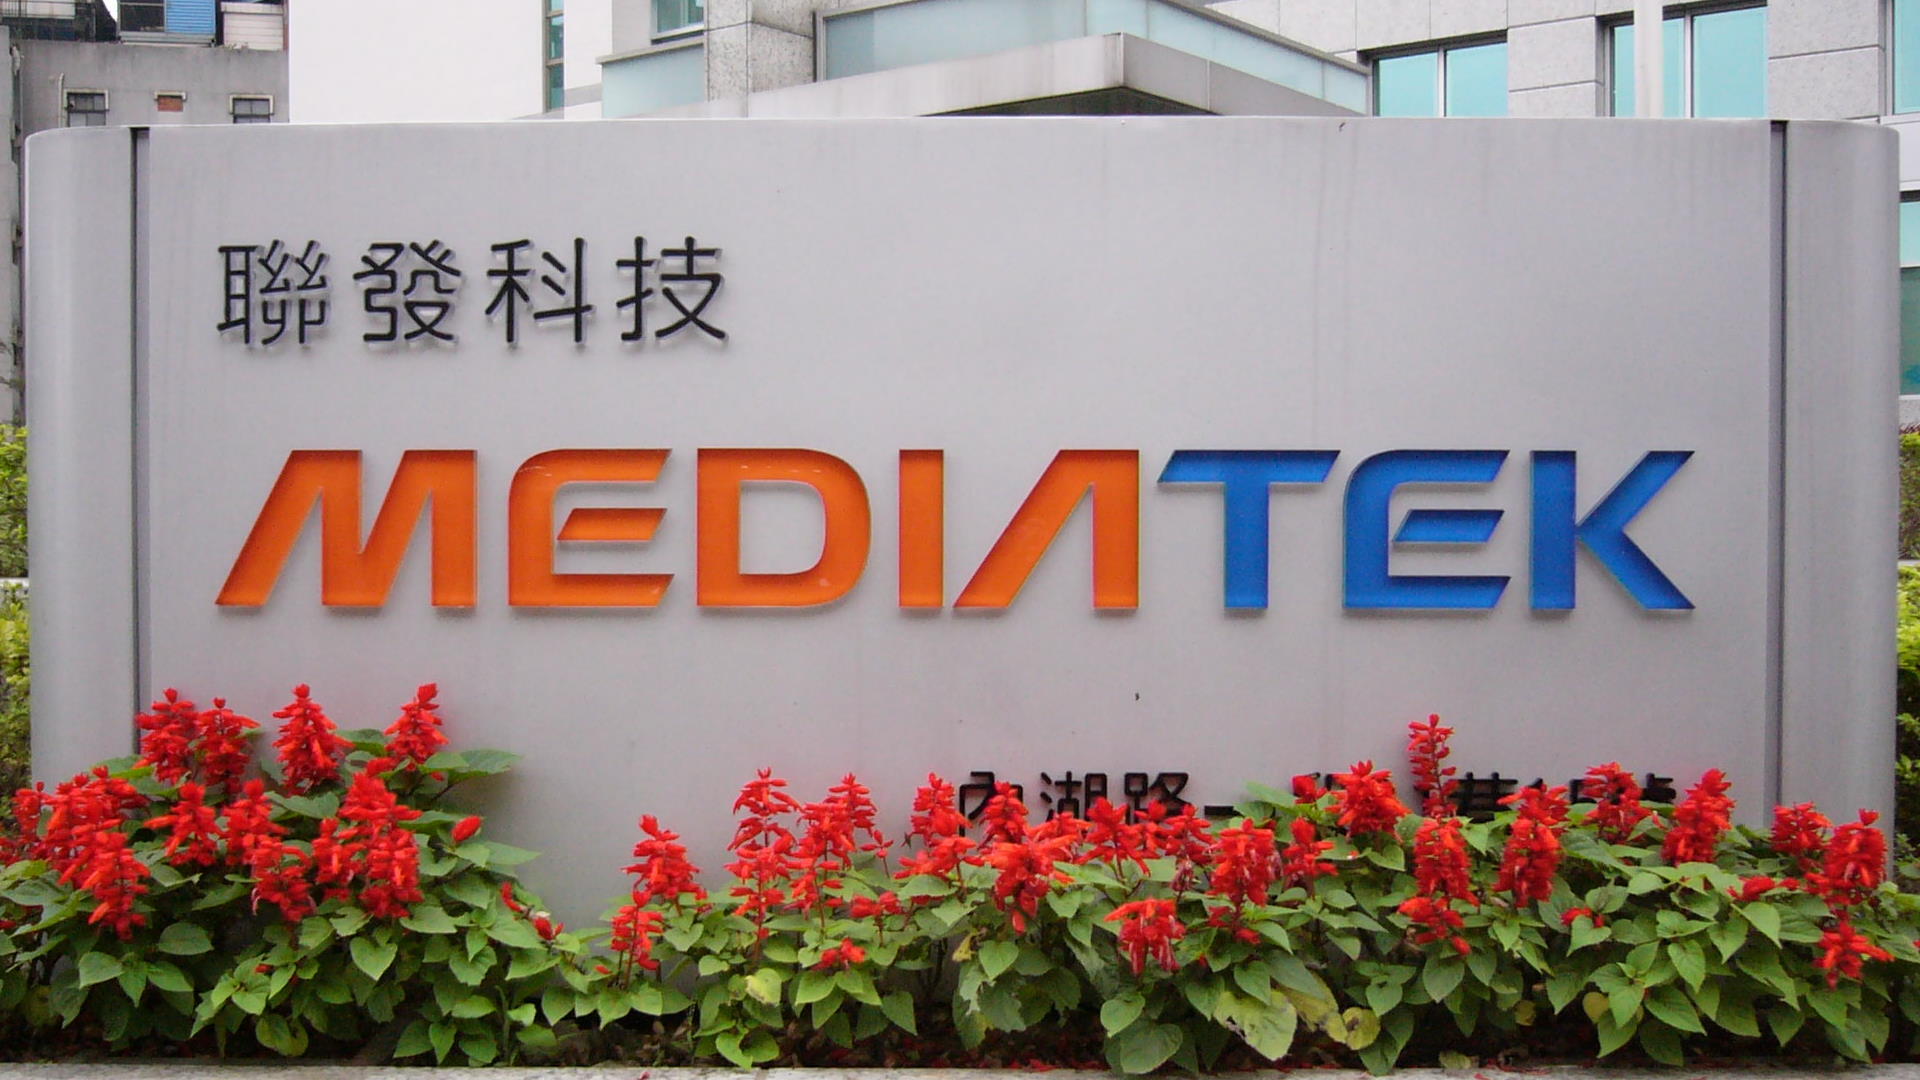 Taiwan-based MediaTek will team up with Purdue University to create a chip design center in the US midwest.